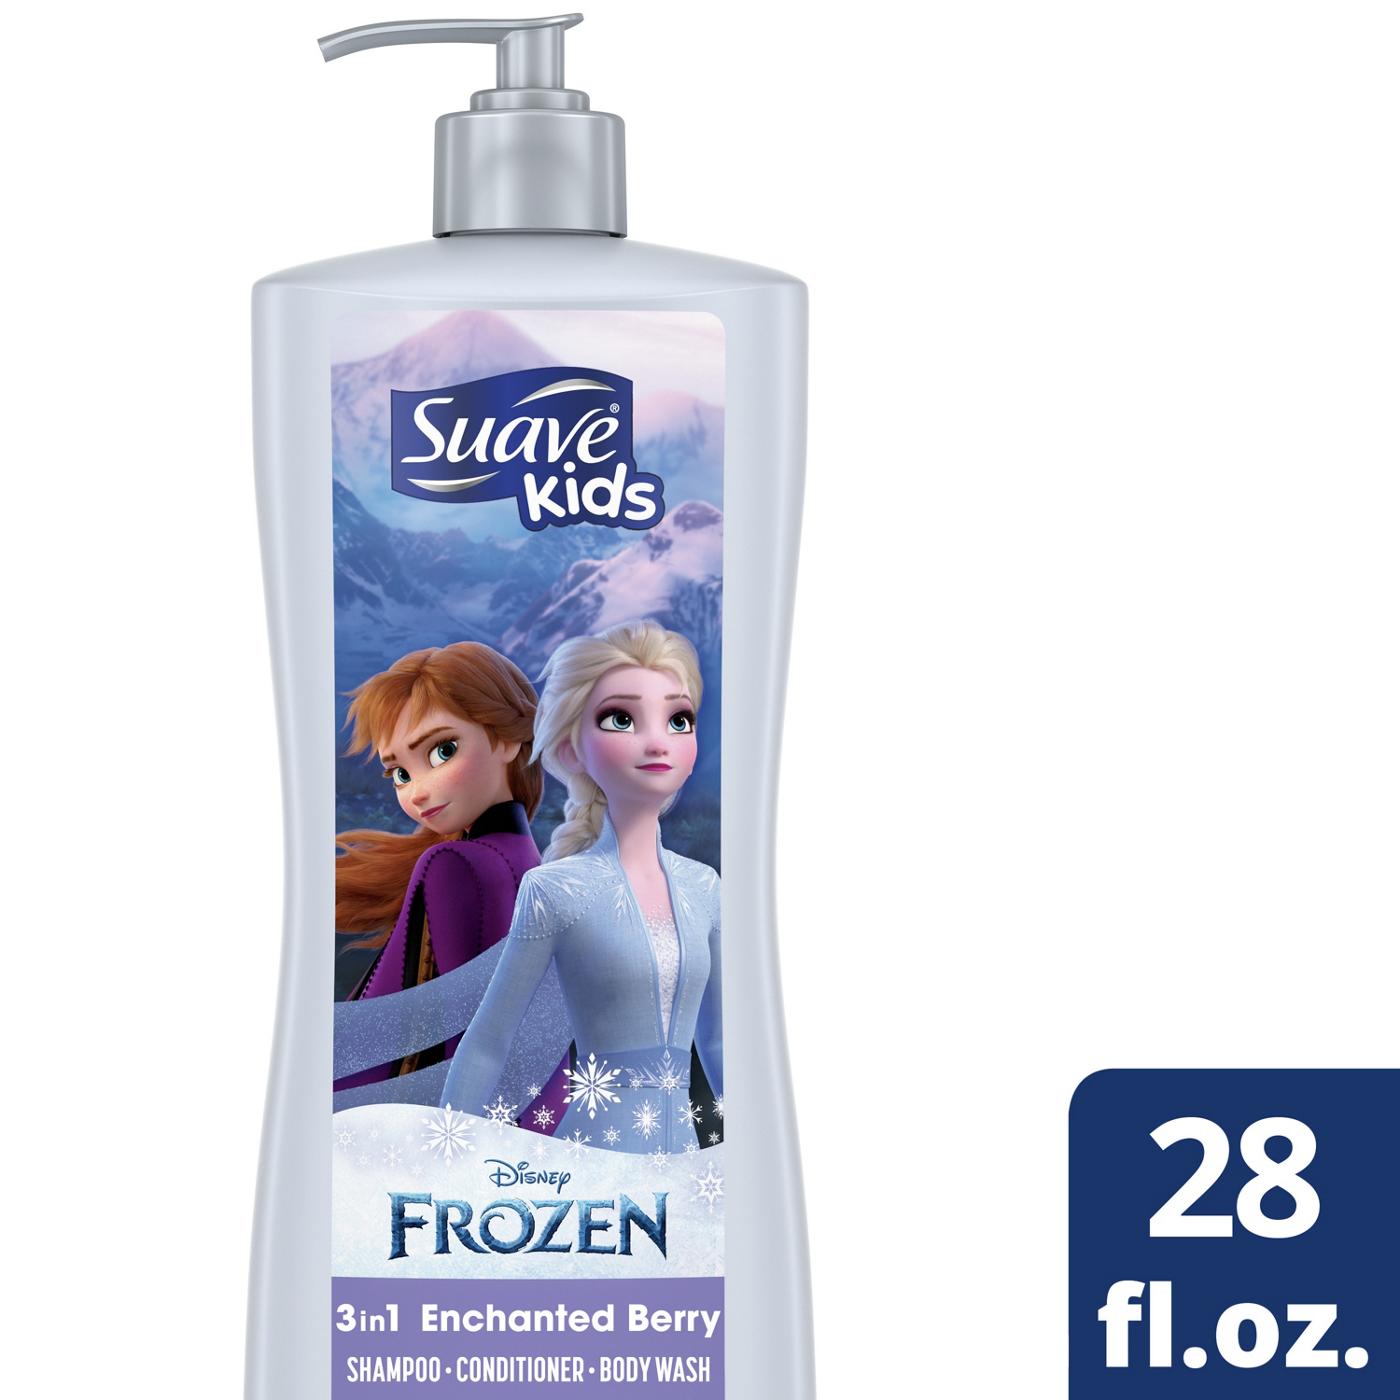 Suave Kids Frozen 3-in-1 Shampoo + Conditioner + Body Wash - Enchanted Berry; image 3 of 6